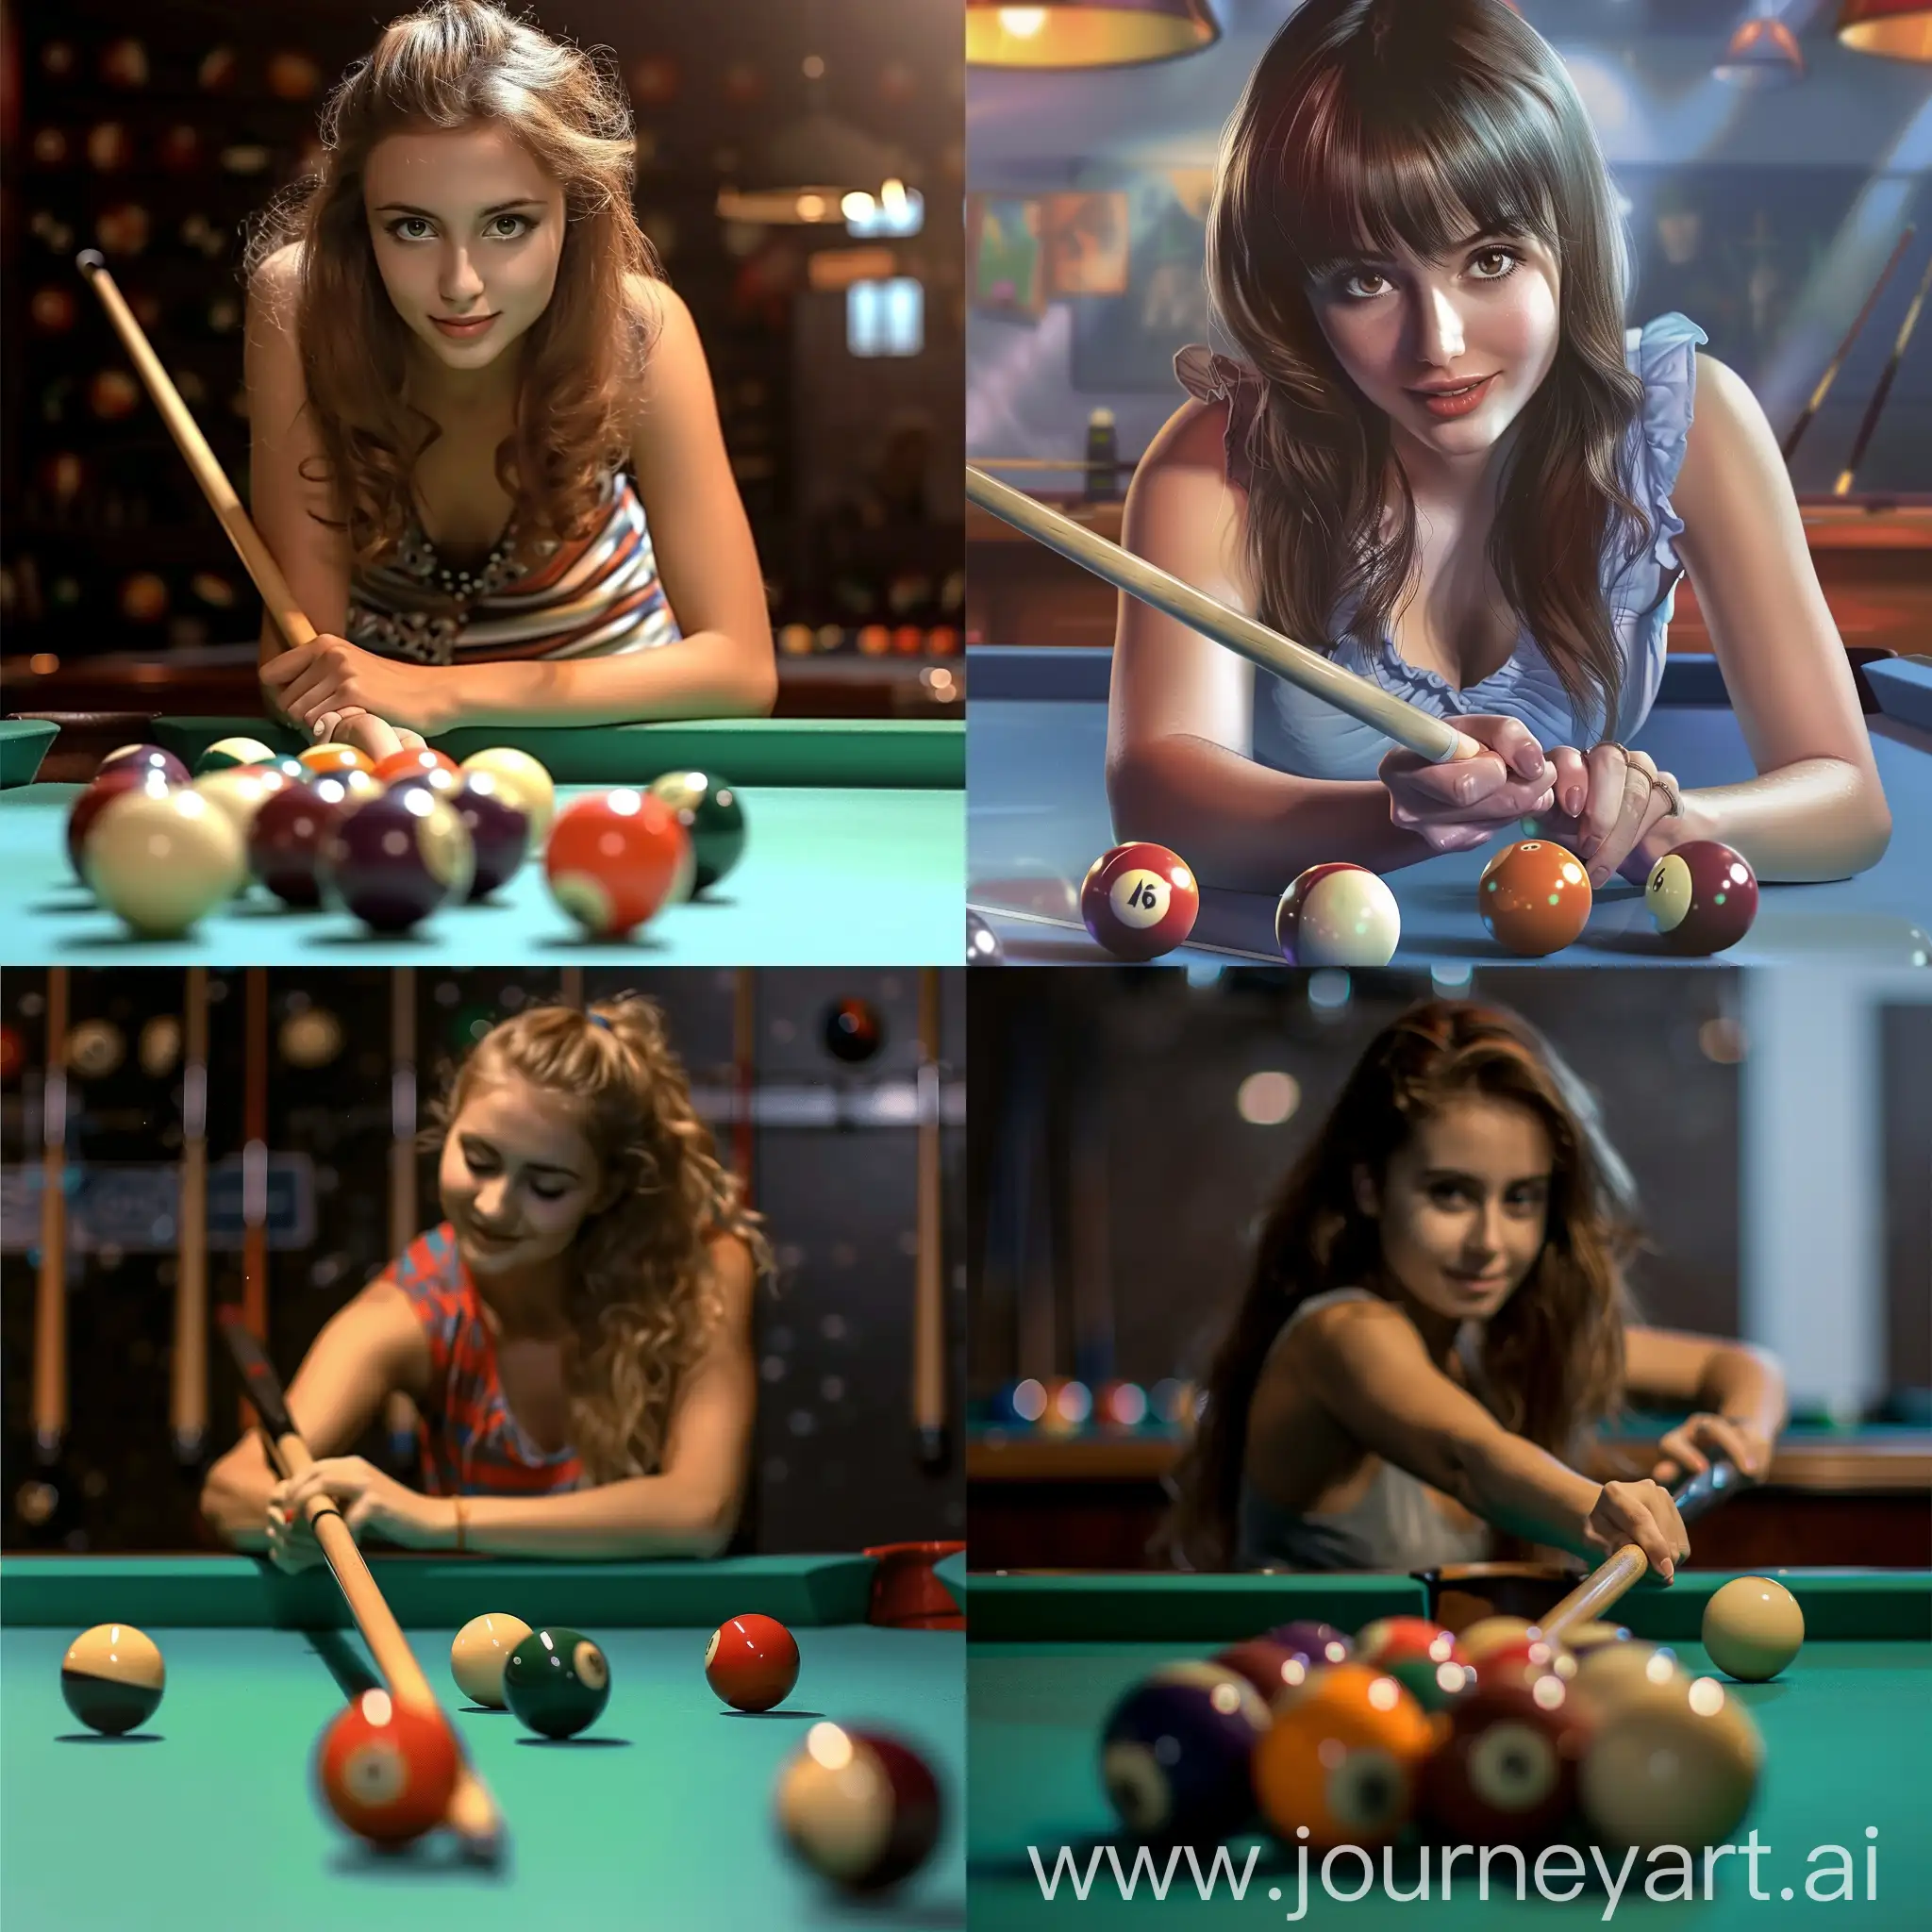 Skillful-Girl-Playing-Billiards-with-Cue-and-Balls-on-Table